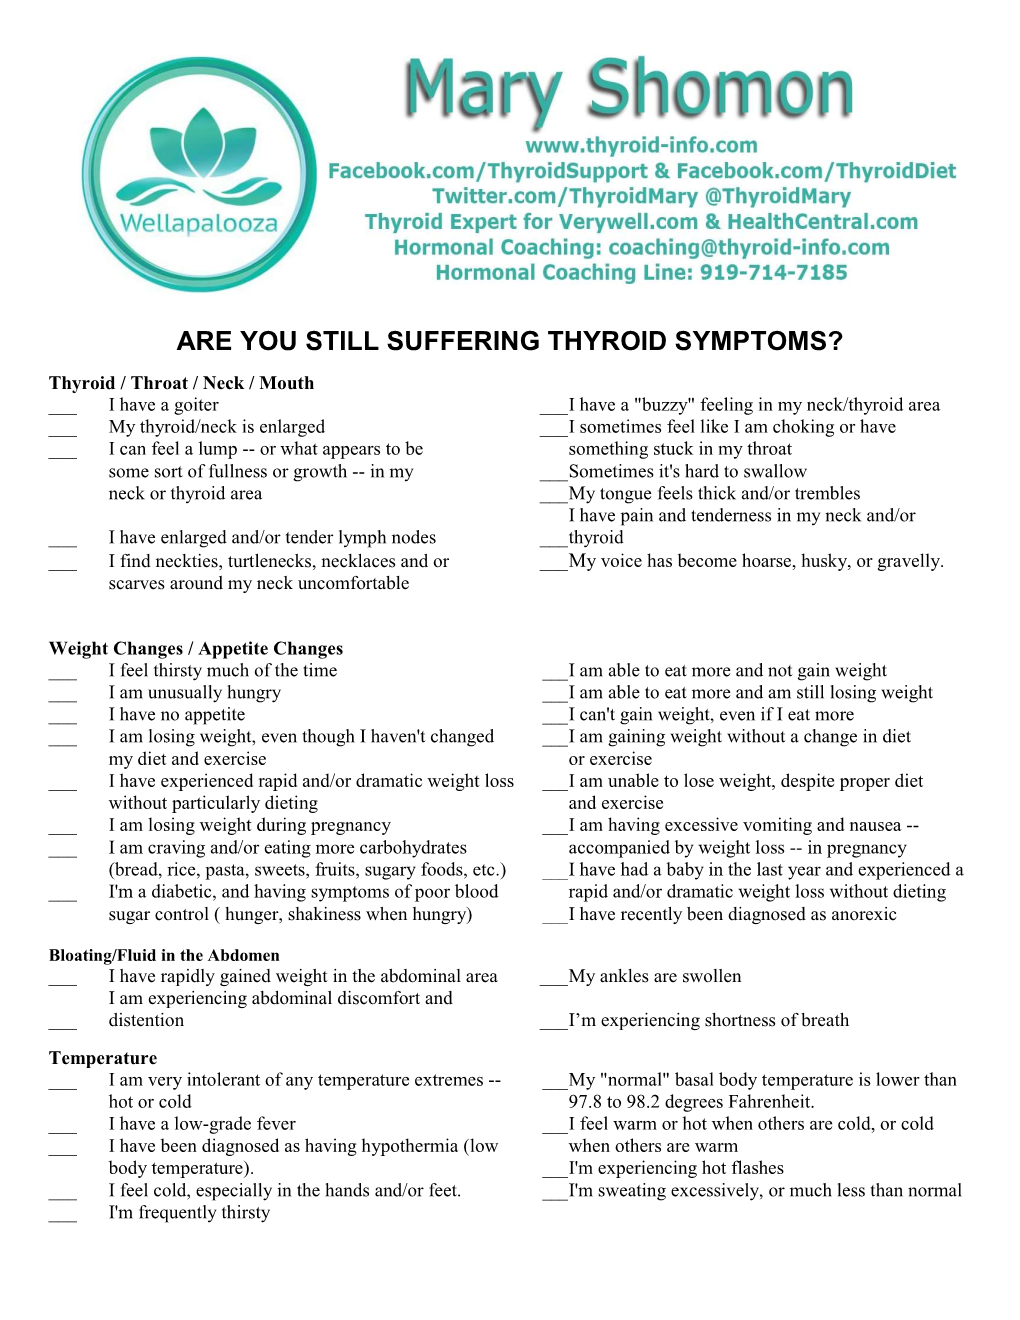 ARE YOU STILL SUFFERING THYROID SYMPTOMS? Thyroid / Throat / Neck / Mouth